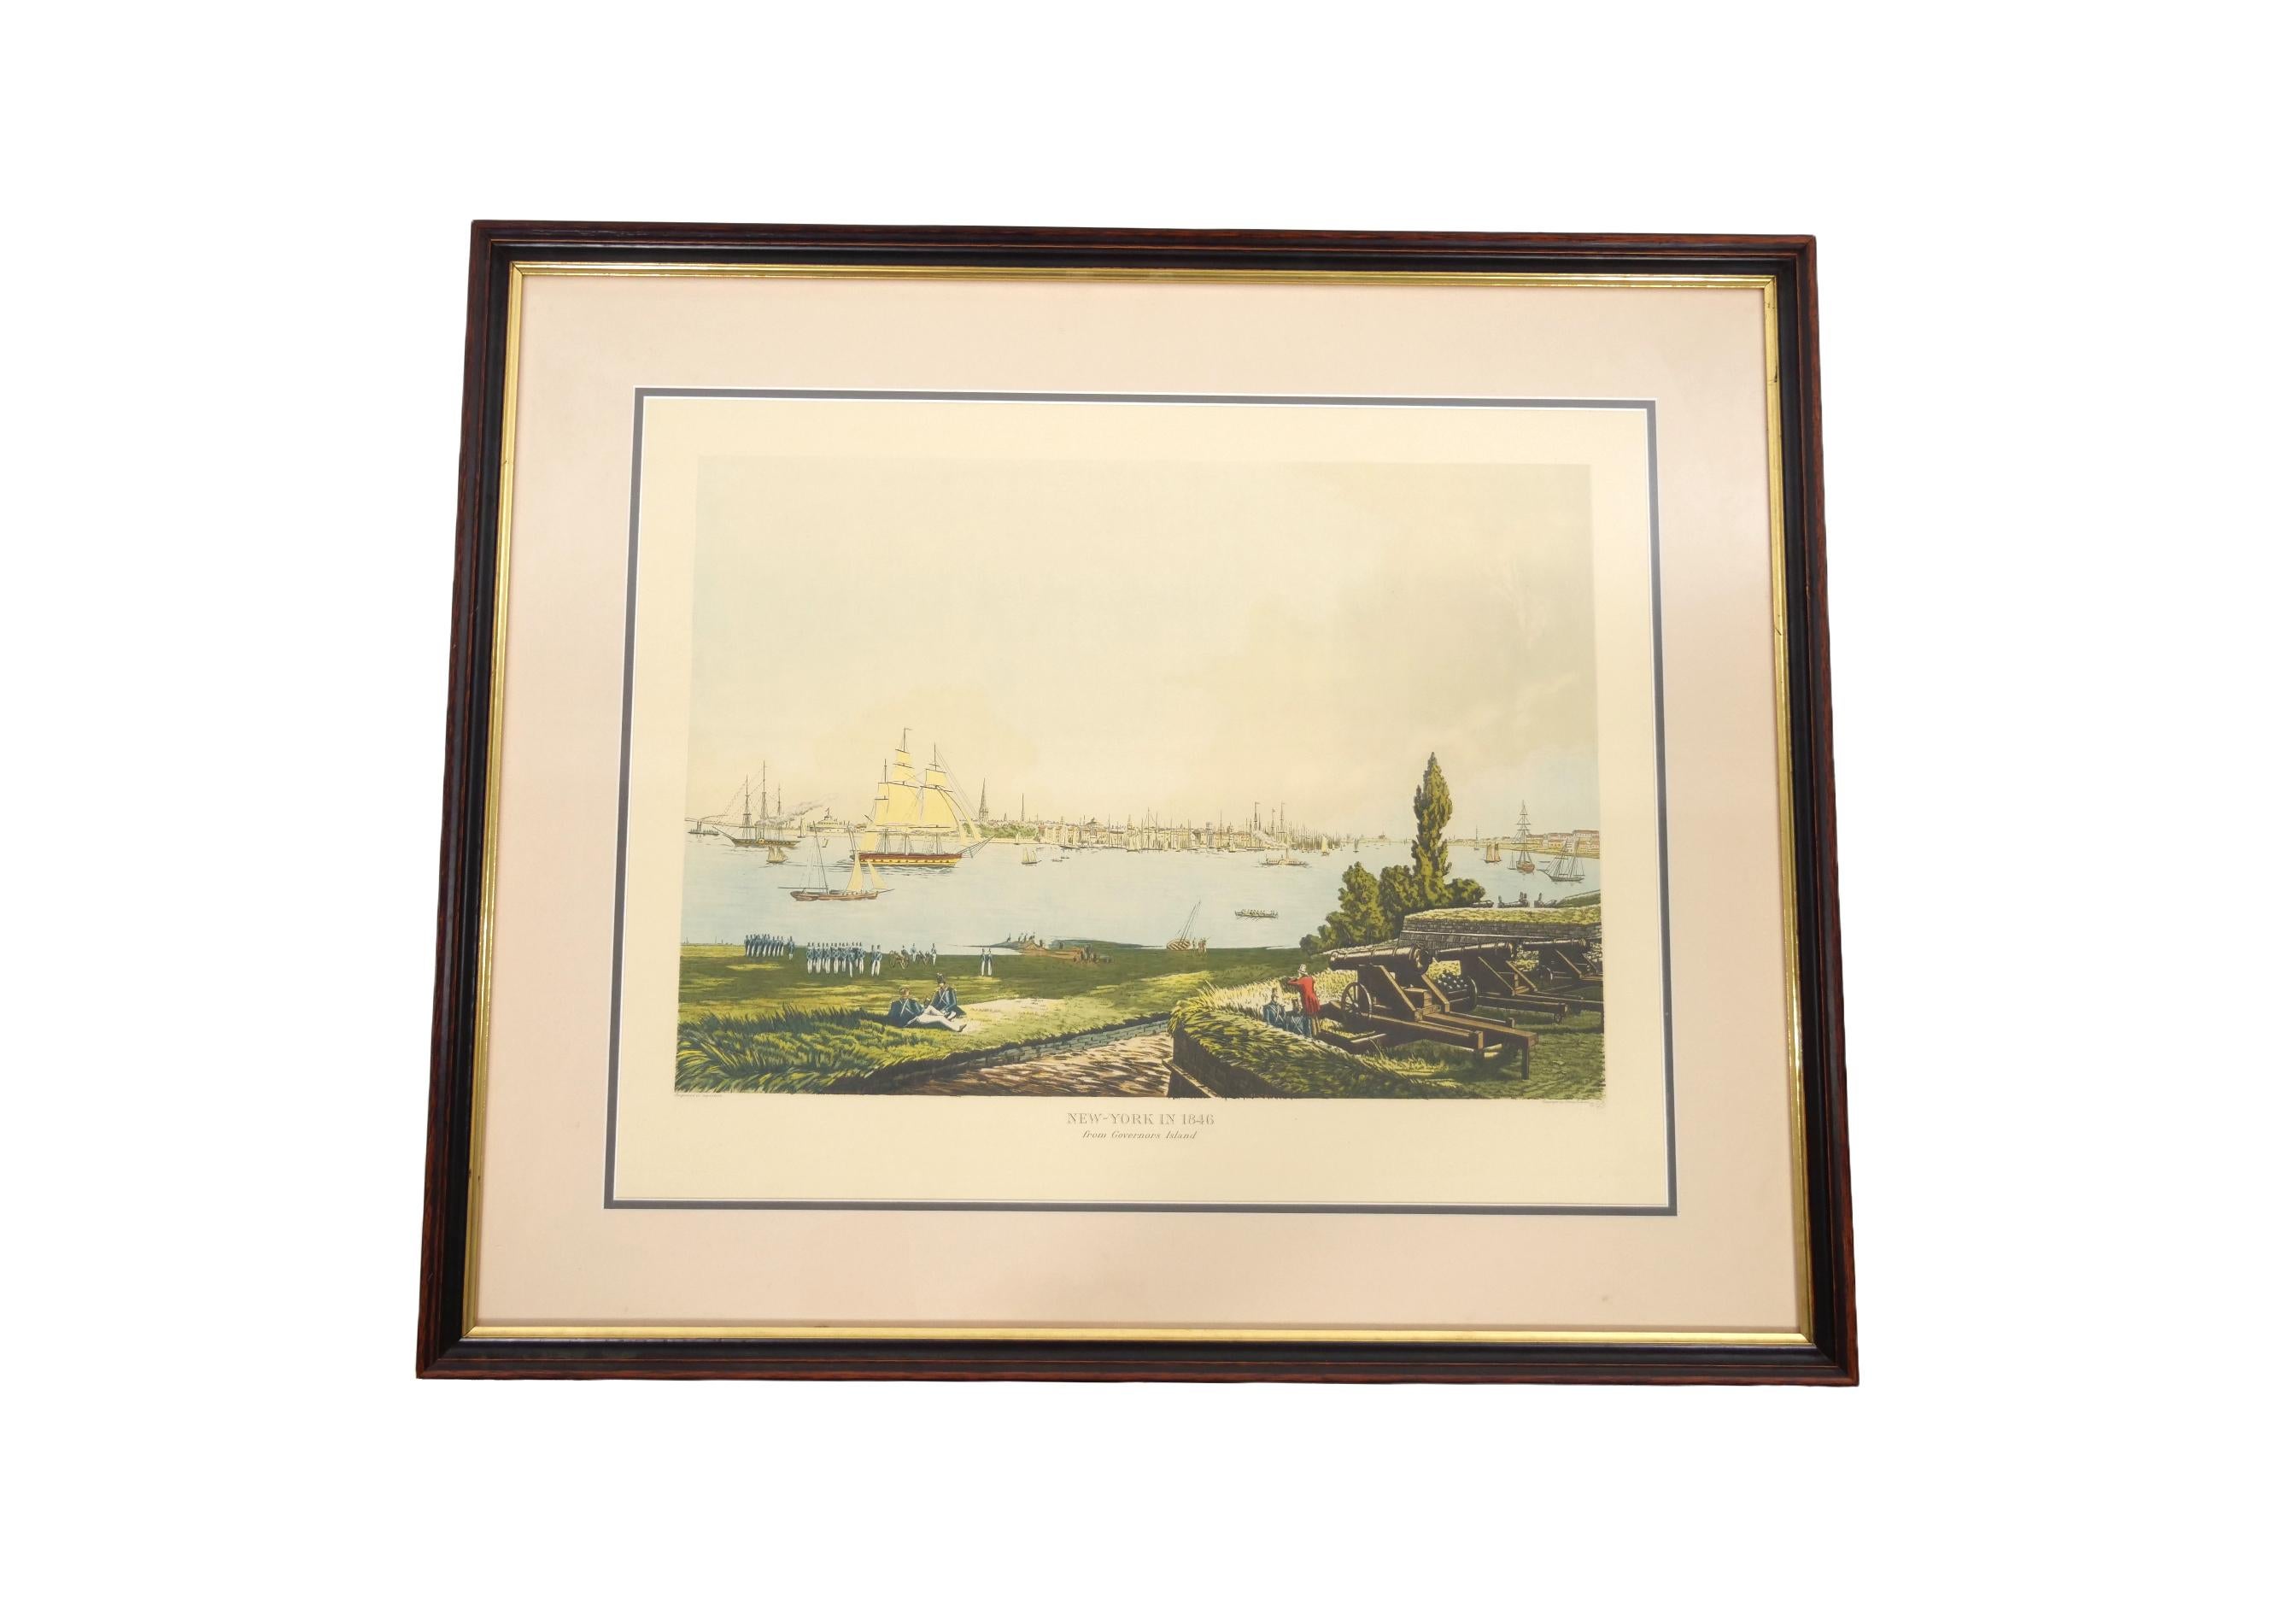 New York / 1846 Framed Aquatint Etching After Frederick Caitherwood For Sale 4